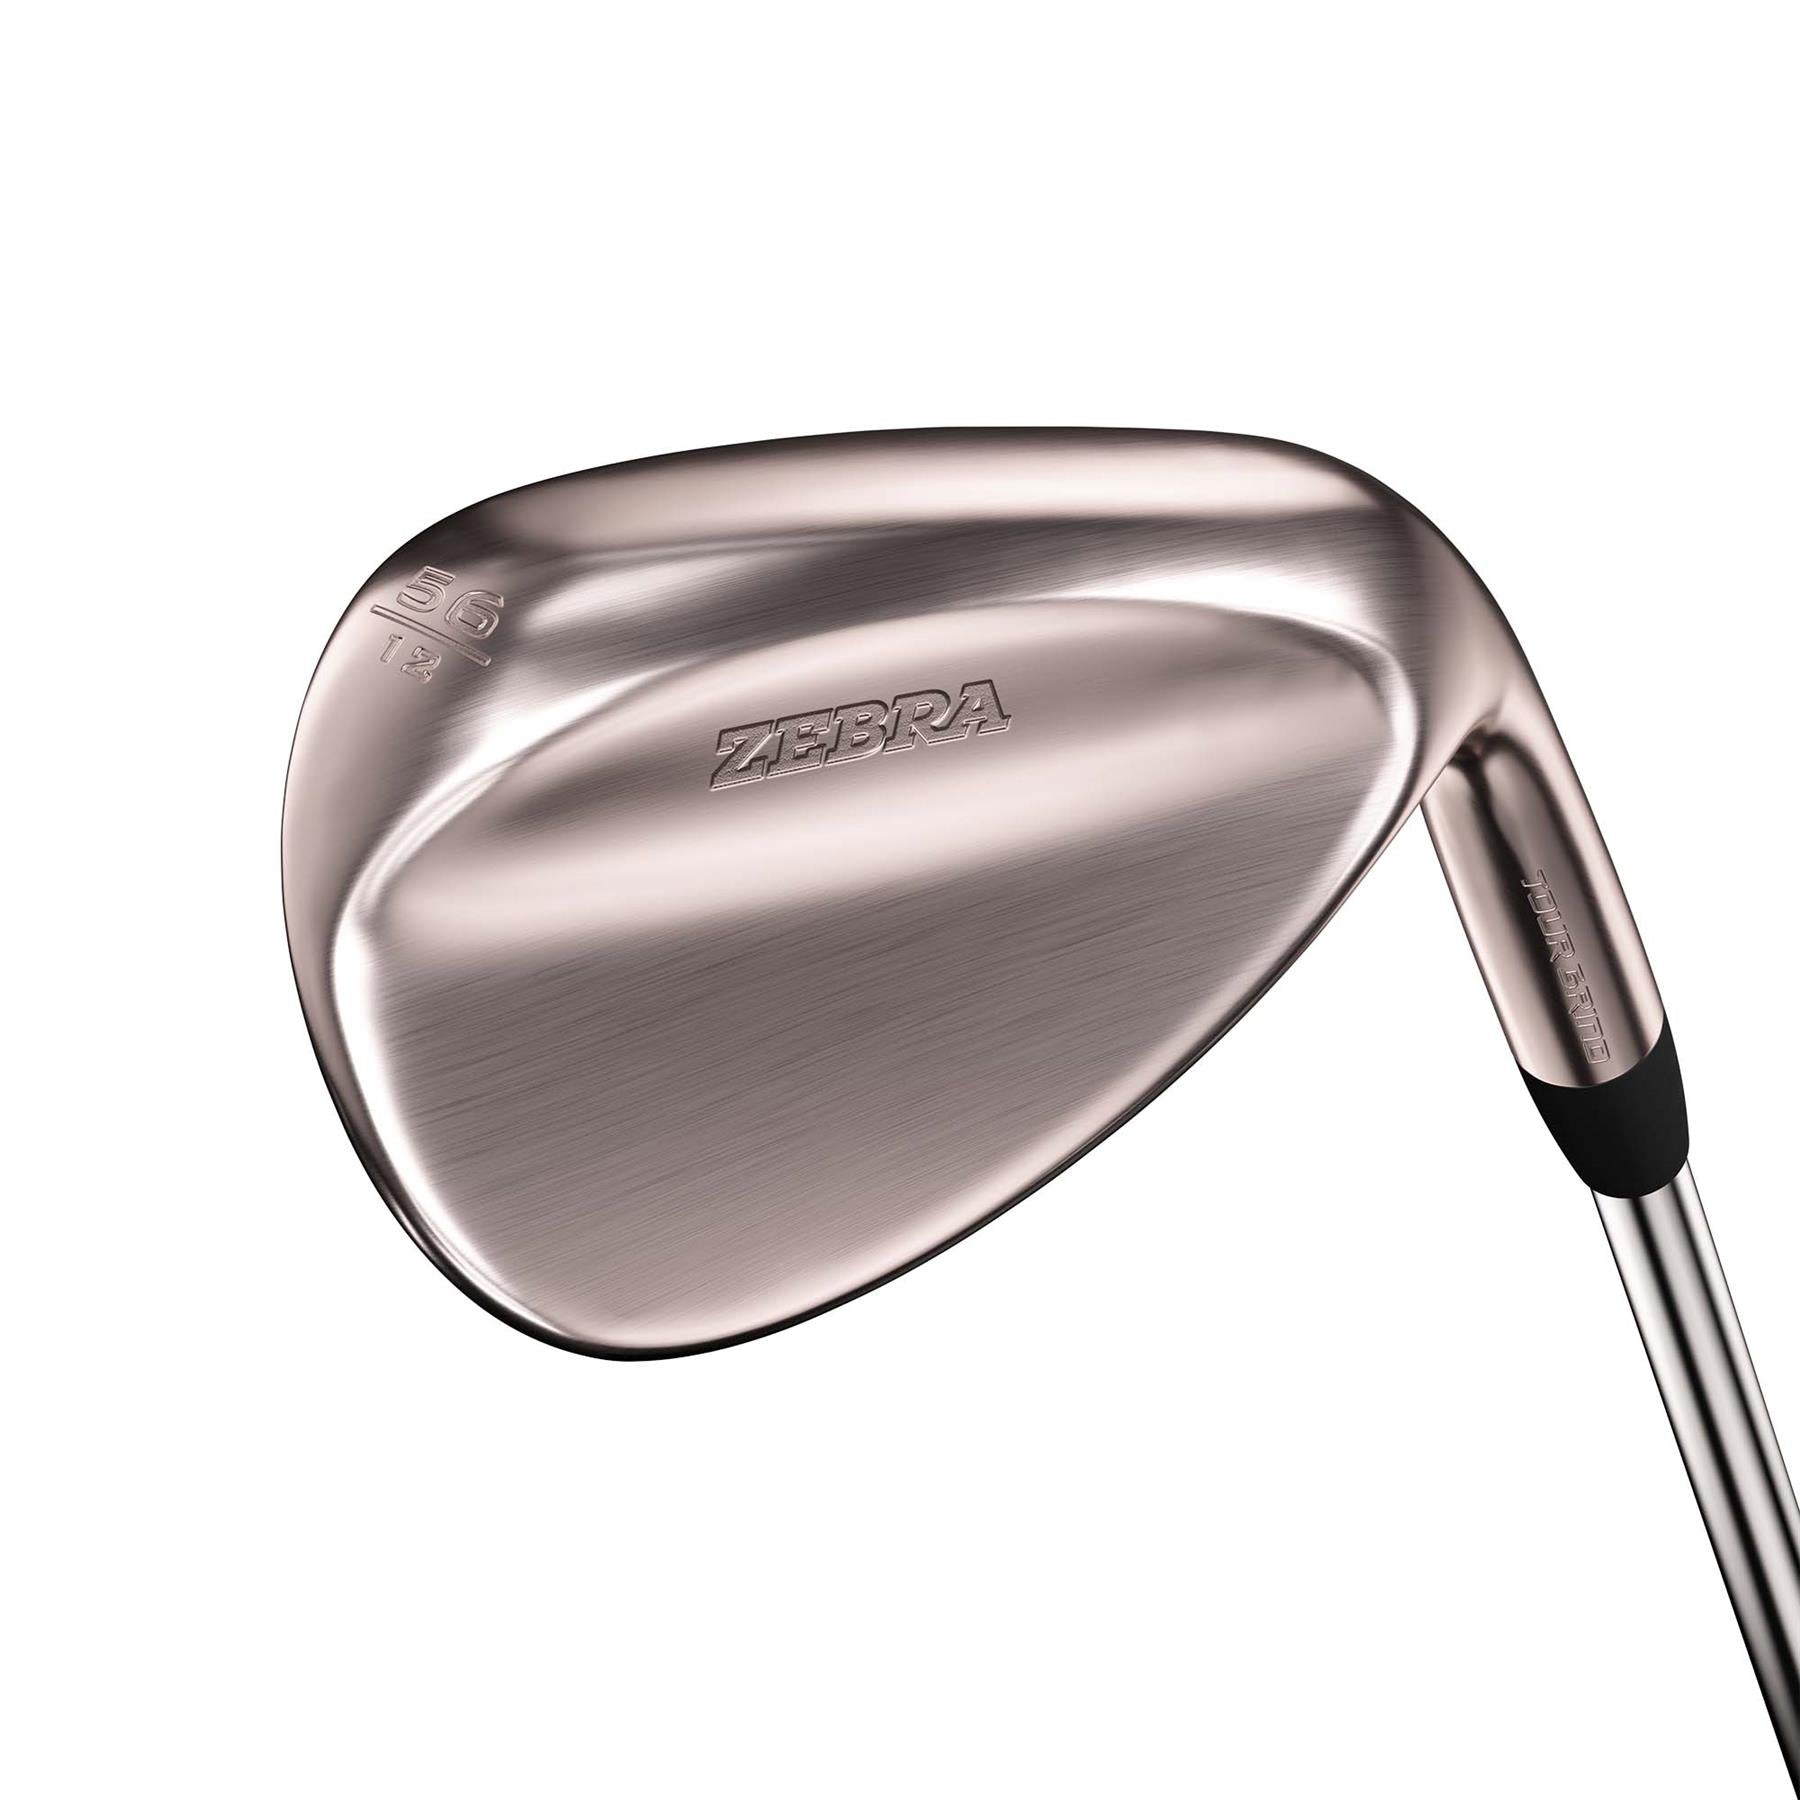 Zebra Golf Tour Grind Forged Chrome Wedge, Mens Right Hand